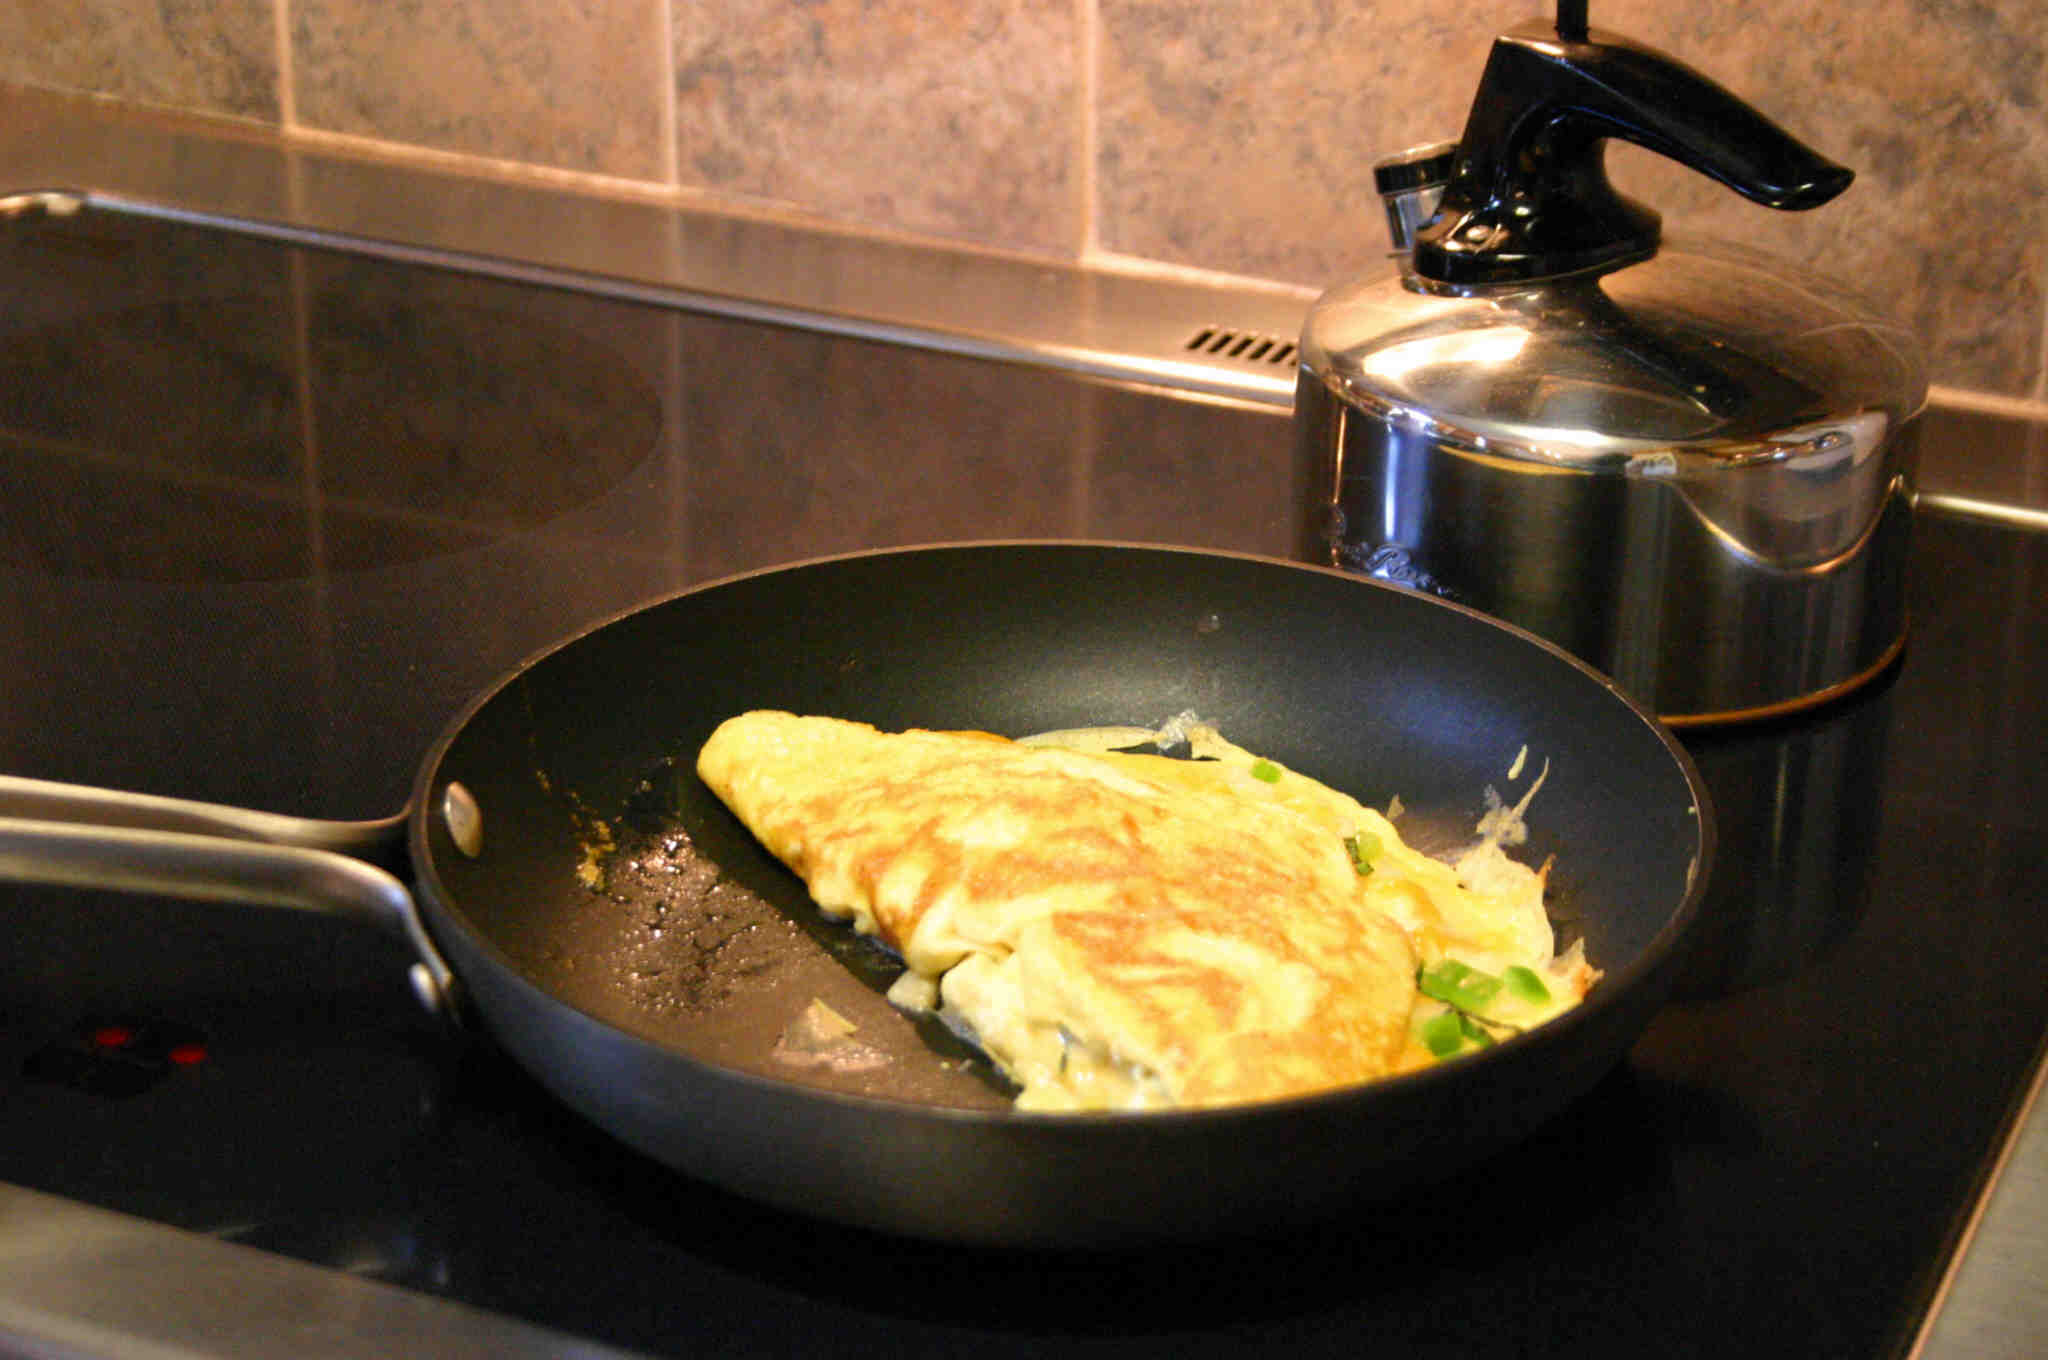 the set has a large pan with an omelet on it